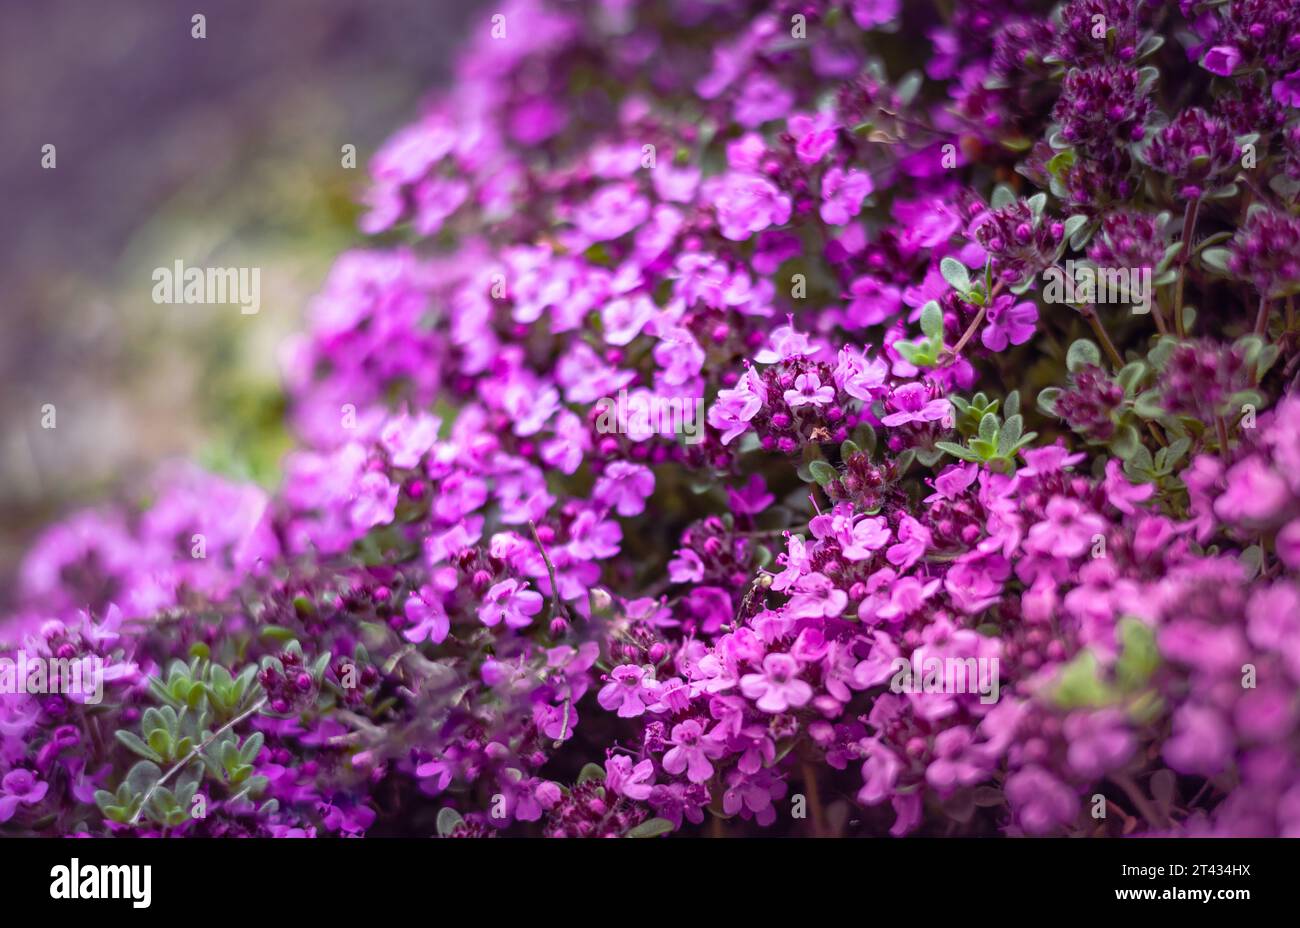 Blurred backgroud with dense carpet of small purple phlox flowers. Stock Photo